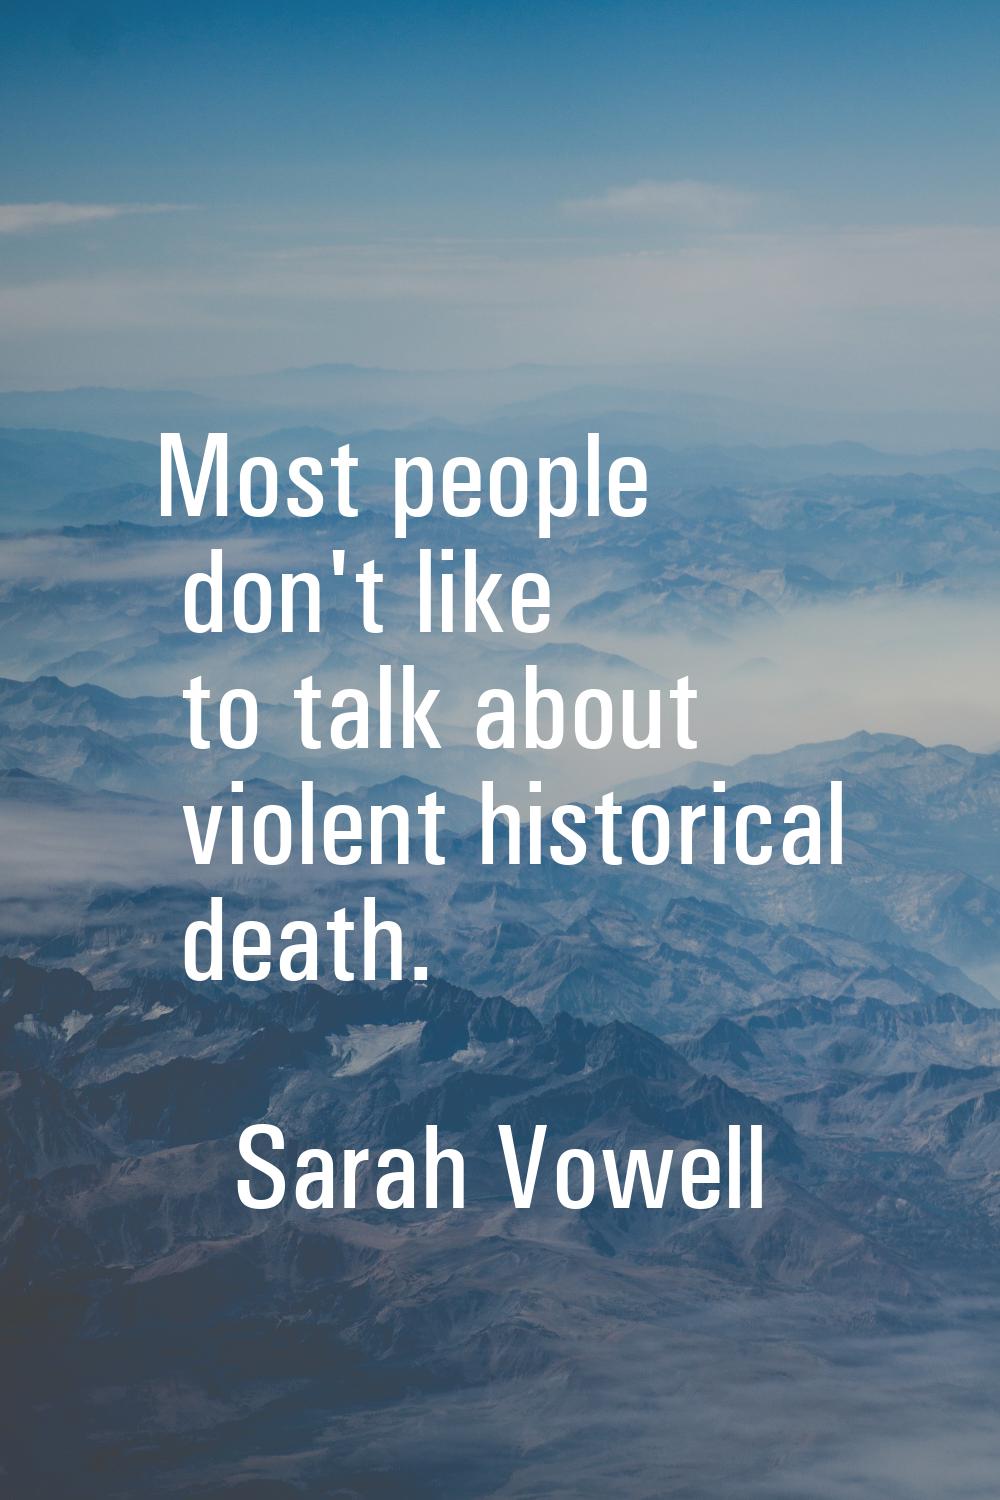 Most people don't like to talk about violent historical death.